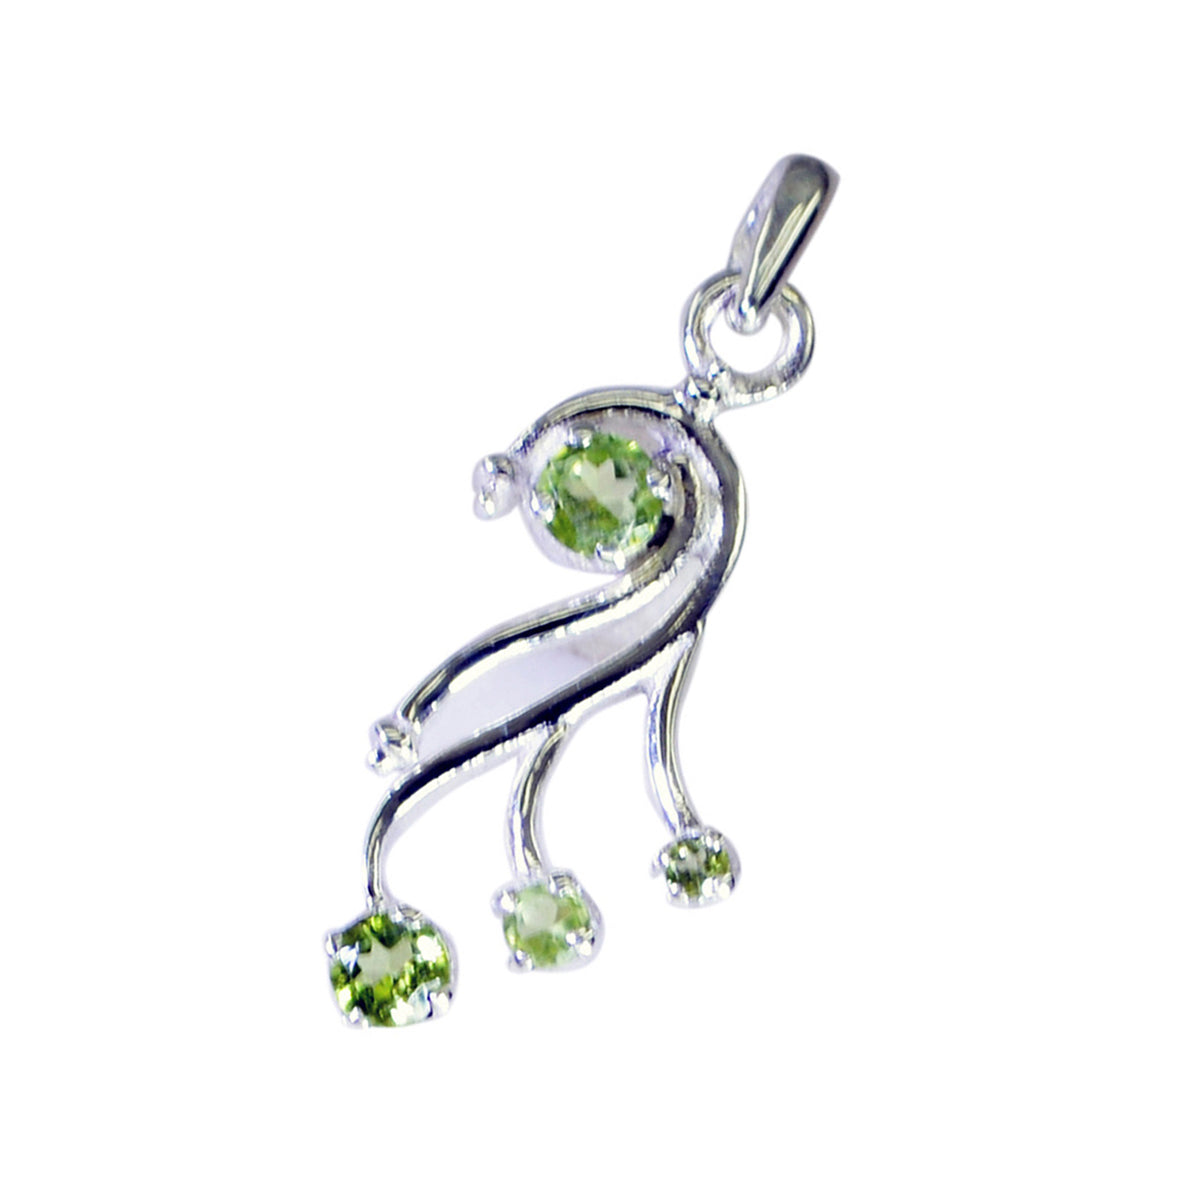 Riyo Glamorous Gems Round Faceted Green Peridot Solid Silver Pendant Gift For Good Friday